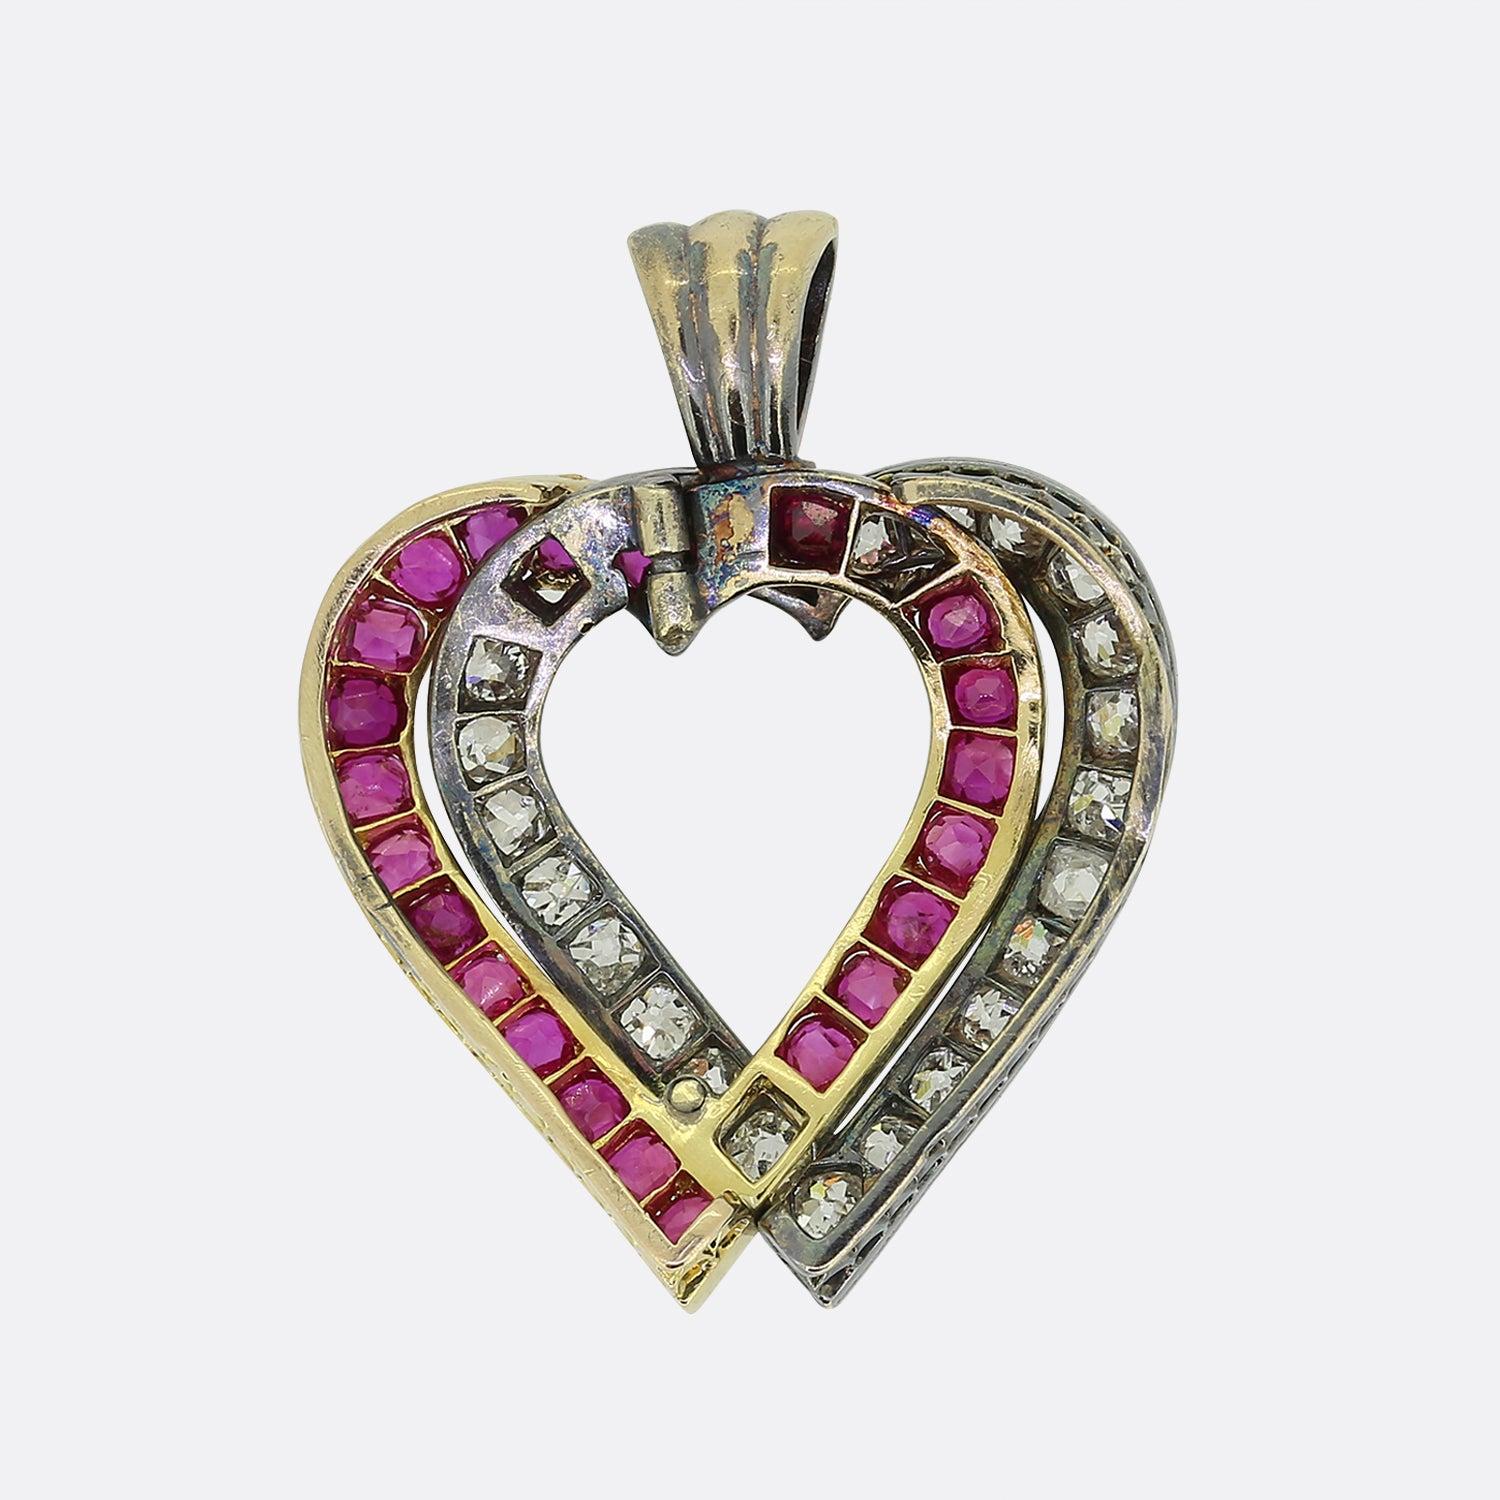 Here we have a gorgeous ruby and diamond heart pendant dating back to the Victorian period. This antique piece has been crafted from both 18ct yellow gold silver with each frame overlapping to form the shape of an open love heart. The silver half